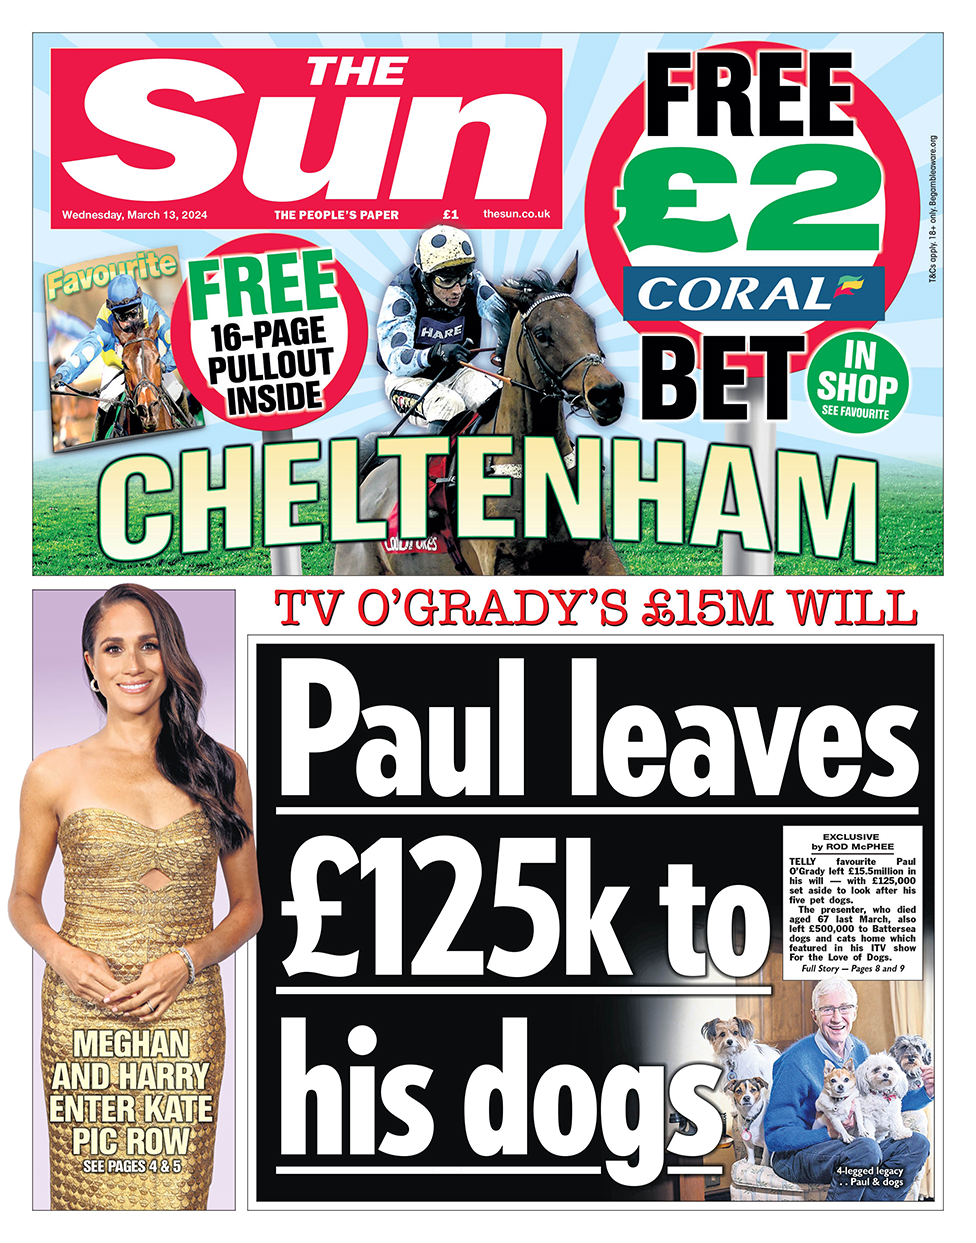 The headline in the Sun reads: "TV O'Grady's £15m will: Paul leaves £125k to his dogs".